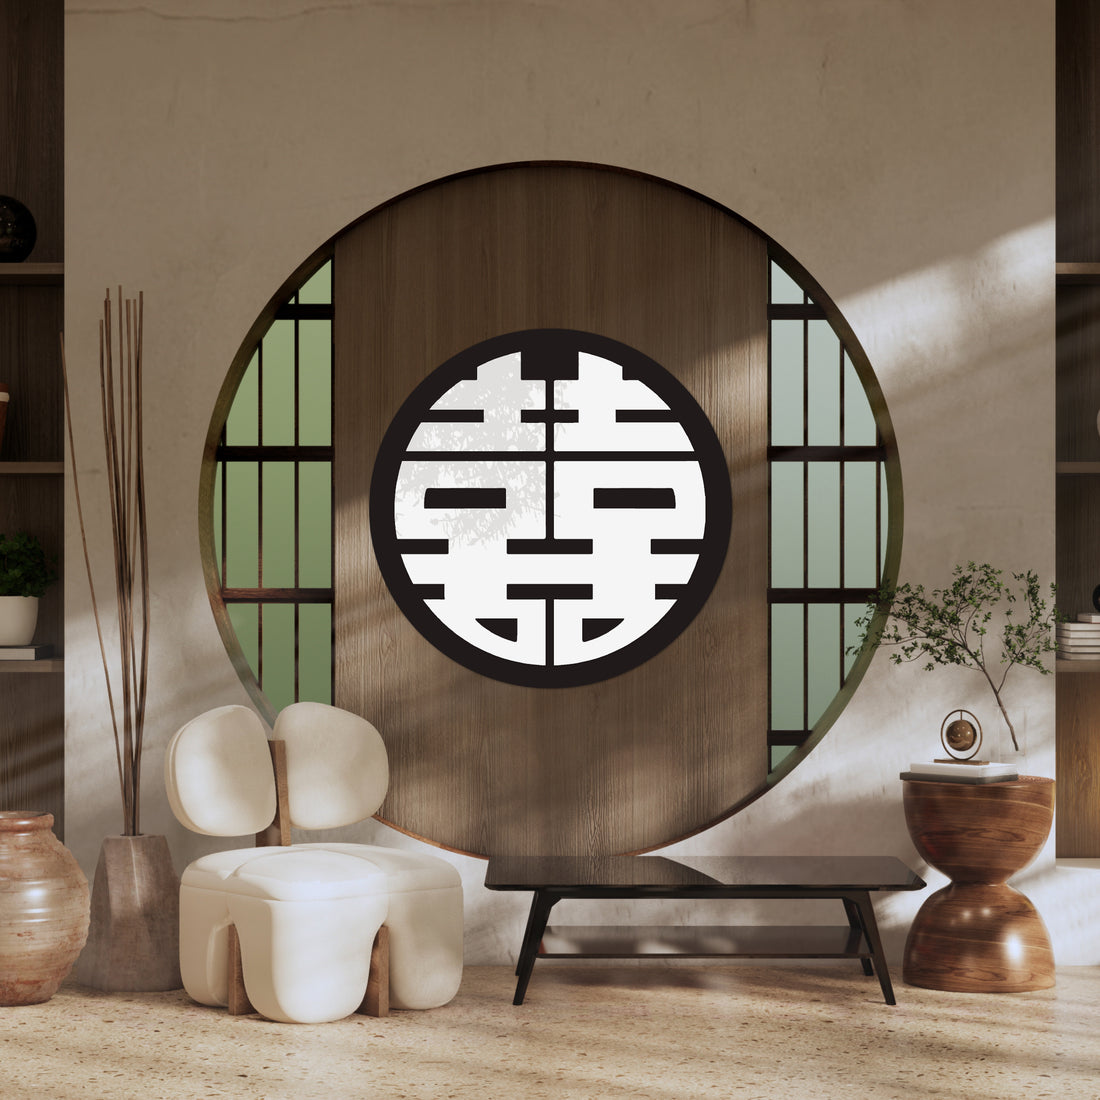 Custom 3D Mirror Acrylic Round Traditional Asian Wedding Sign, Chinese Double Happiness 囍 Hỷ Joy Tea Ceremony Signage, Event Wall Decor Hoop